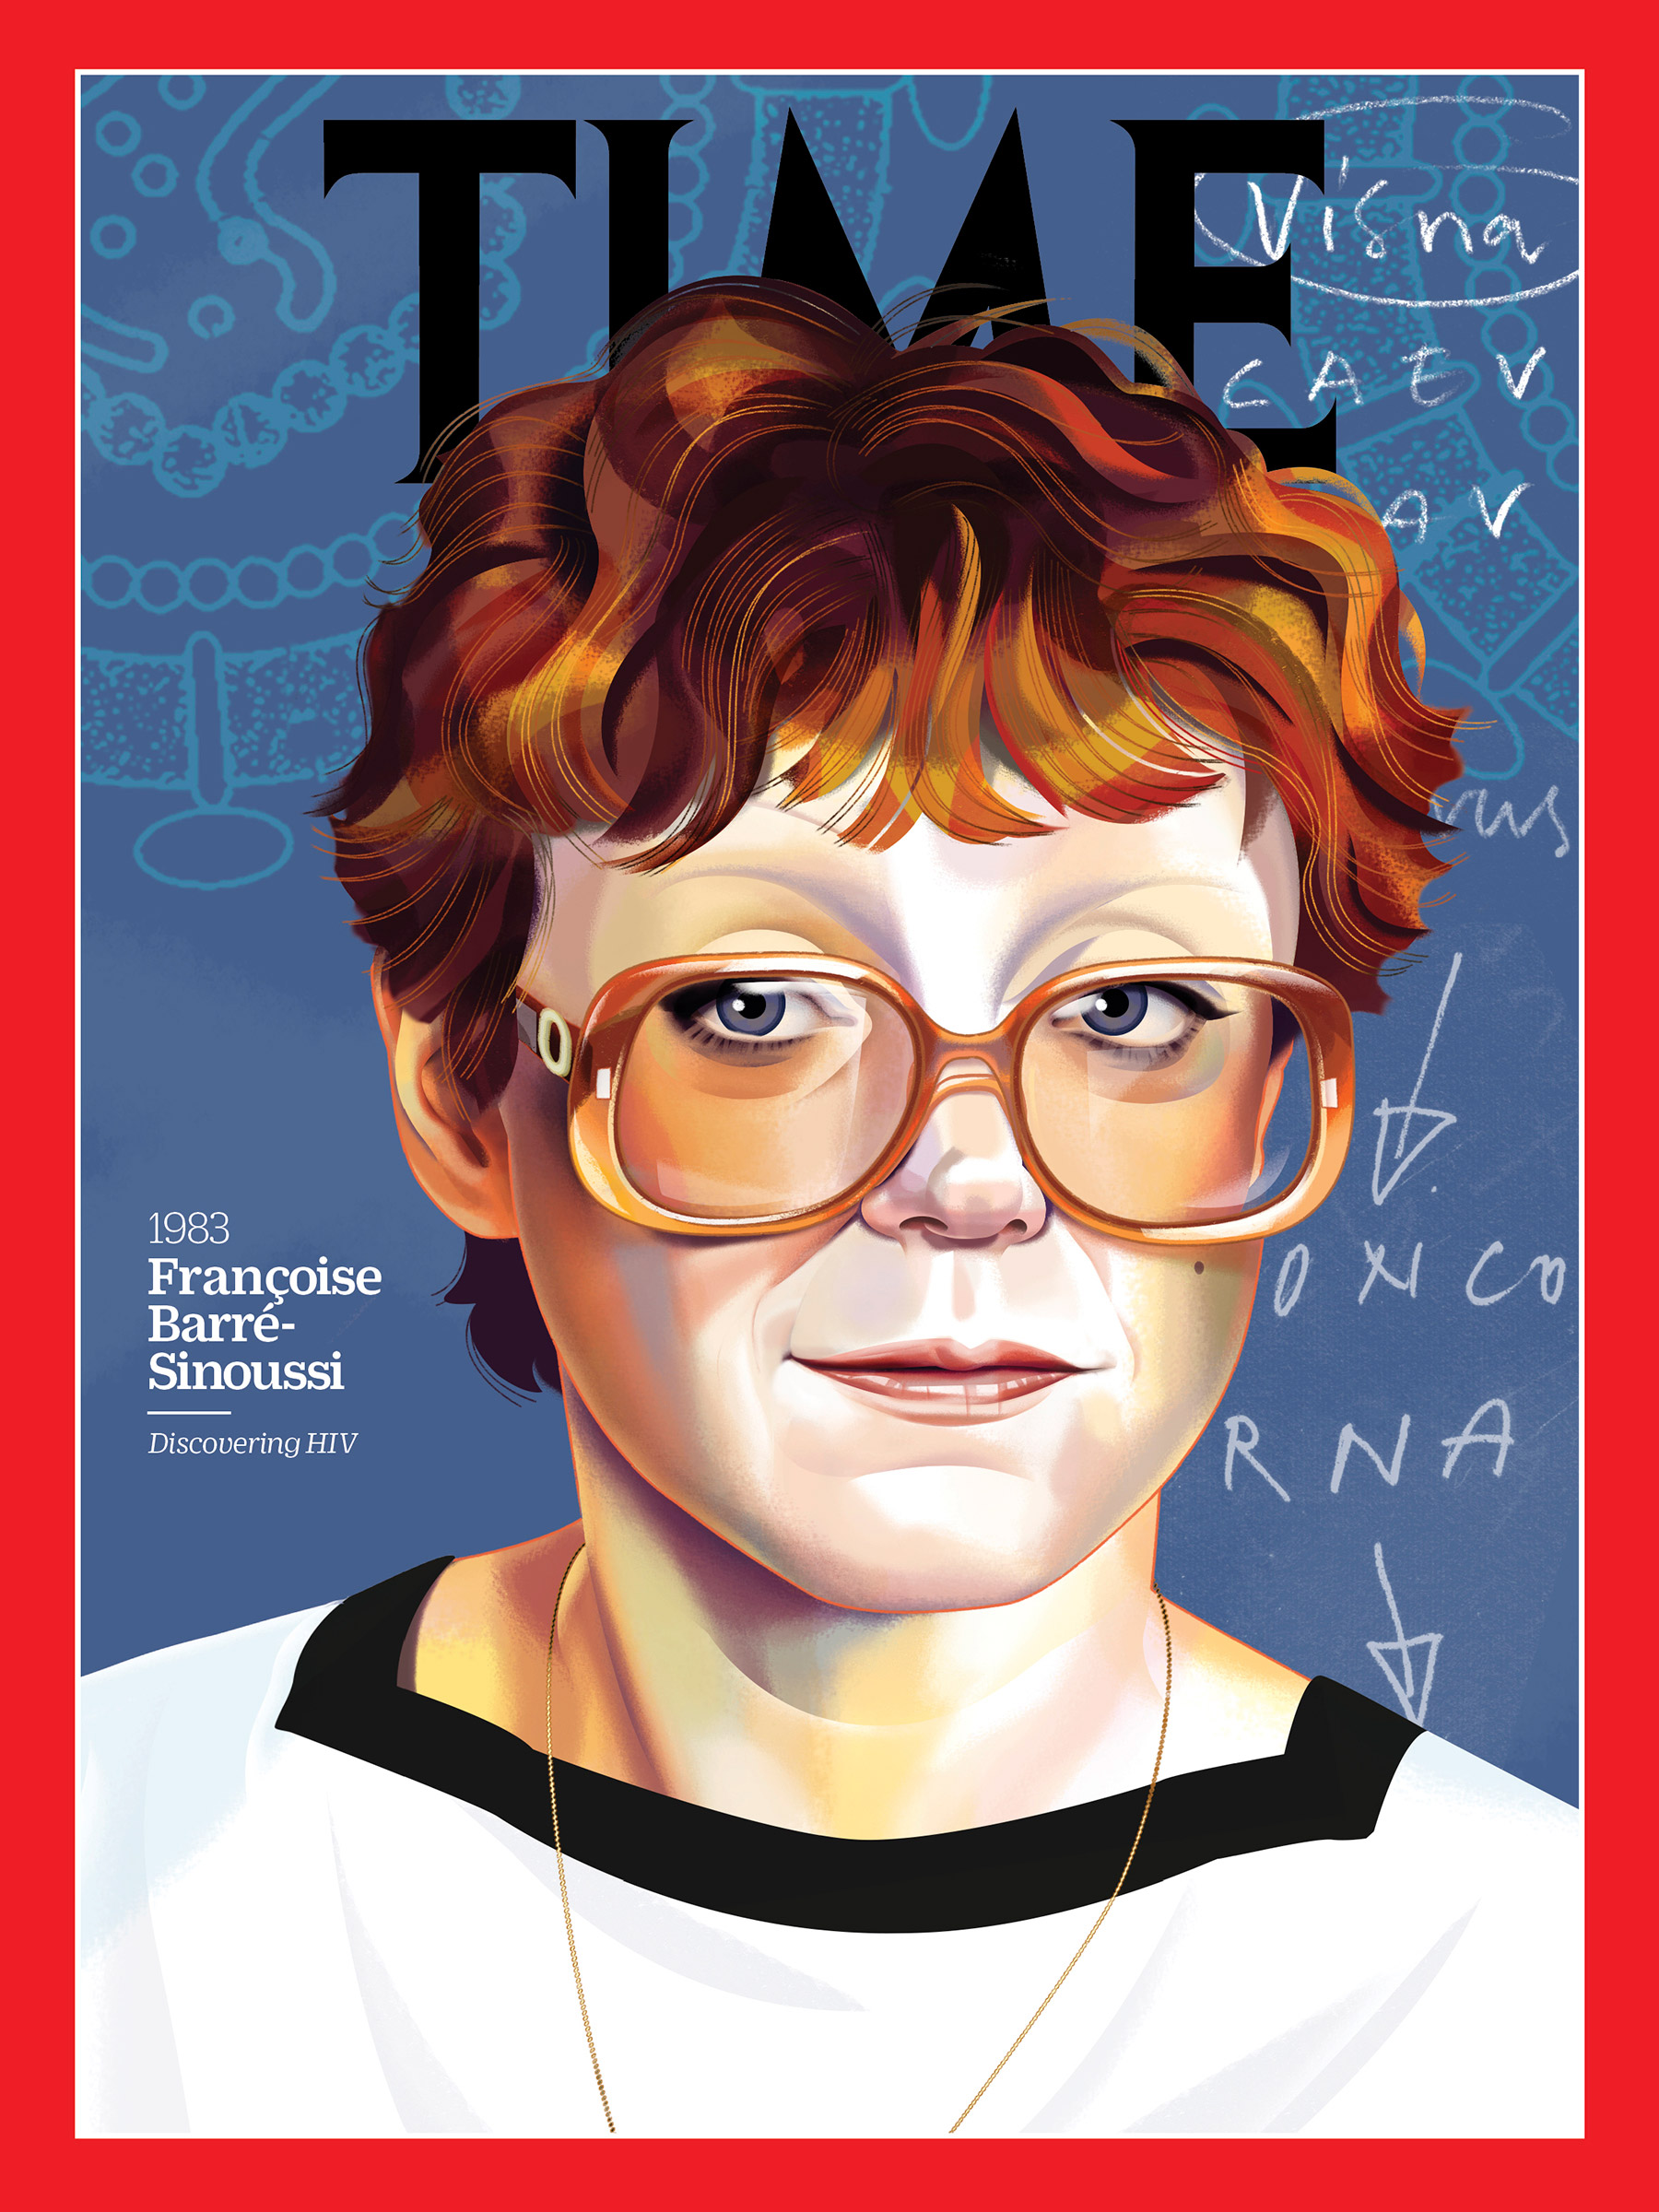 <a href="https://fineartamerica.com/featured/francoise-barre-sinoussi-1983-time.html"><strong>Buy the cover art→</strong></a> (Illustration by Nigel Buchanan for TIME; Michel Philippot—Sygma via Getty)